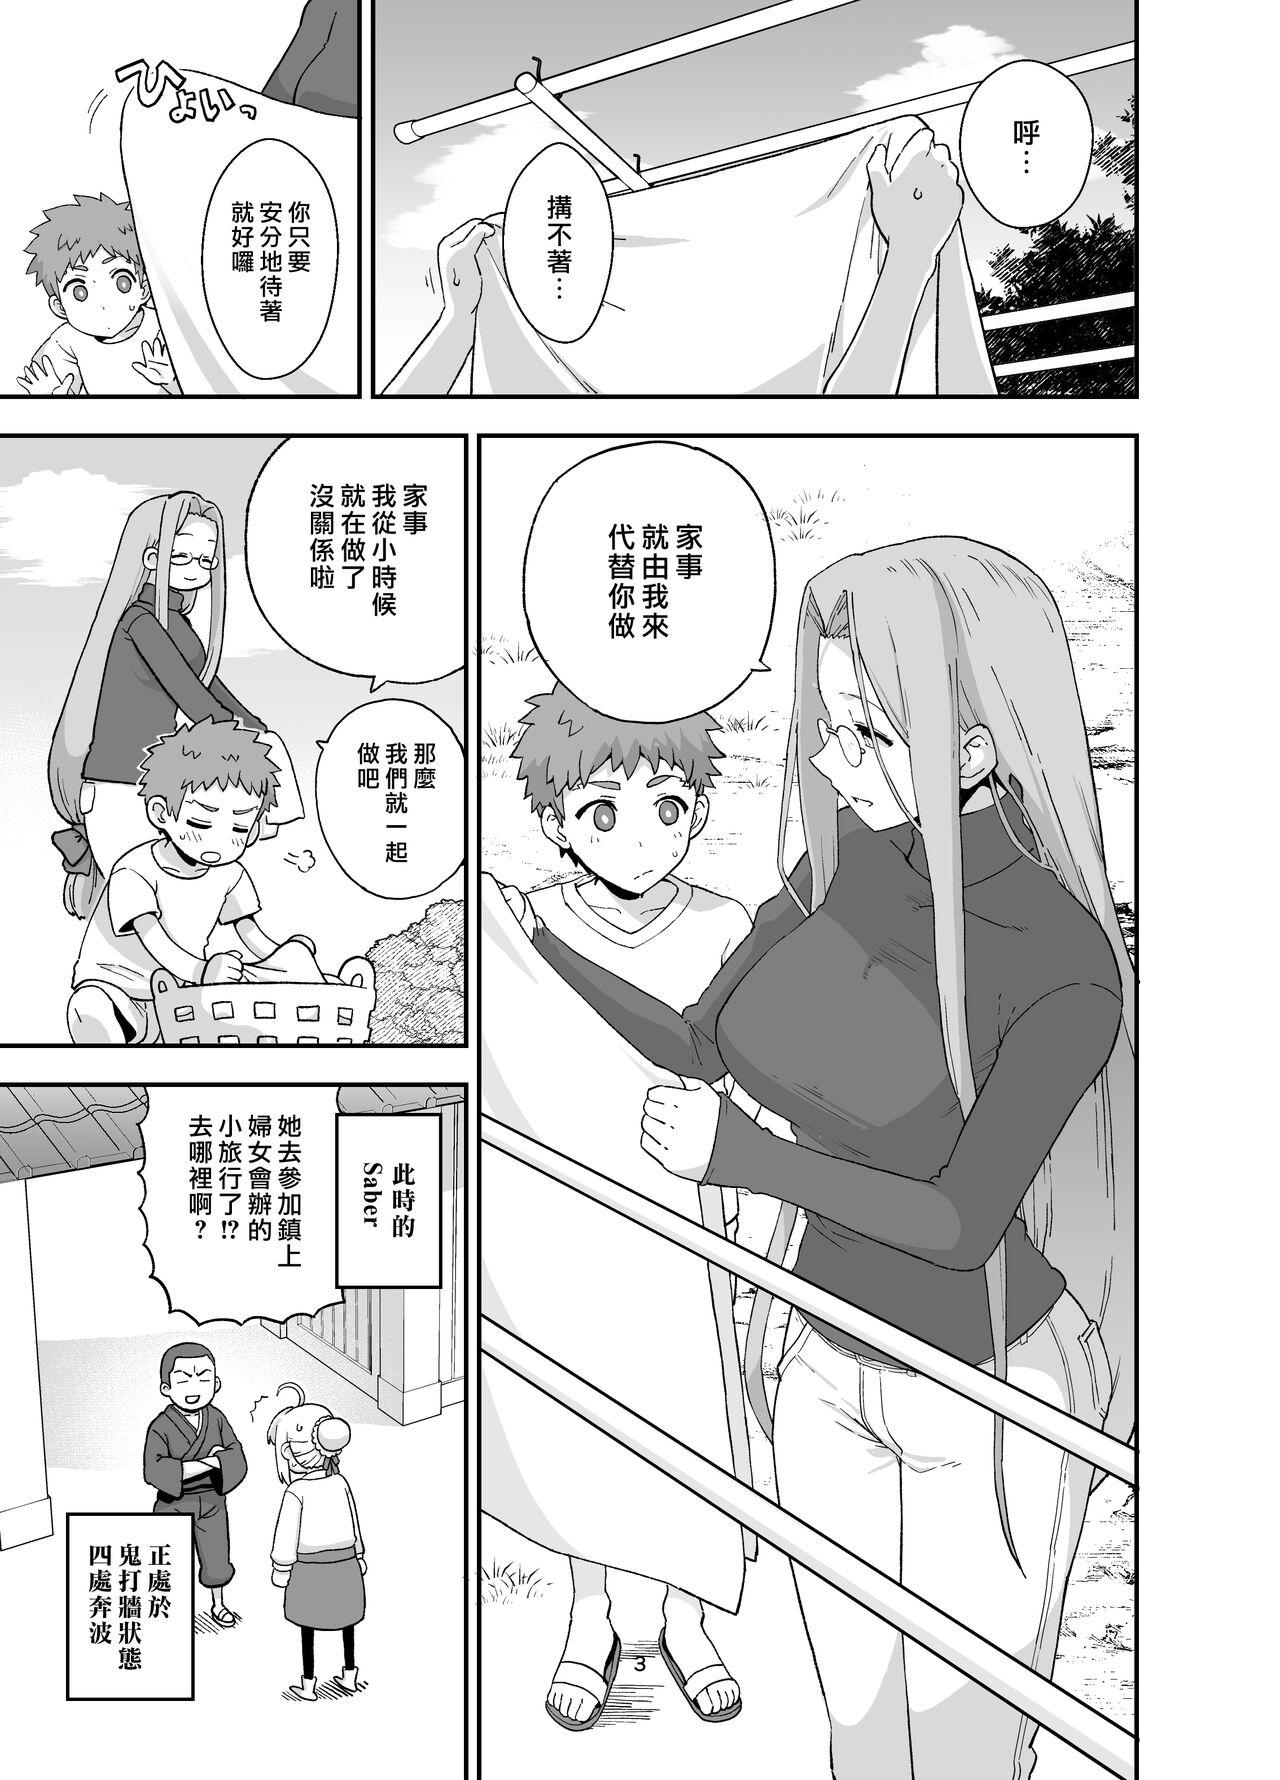 Dorm Rider-san to Orusuban - Fate stay night Hot Naked Girl - Page 6